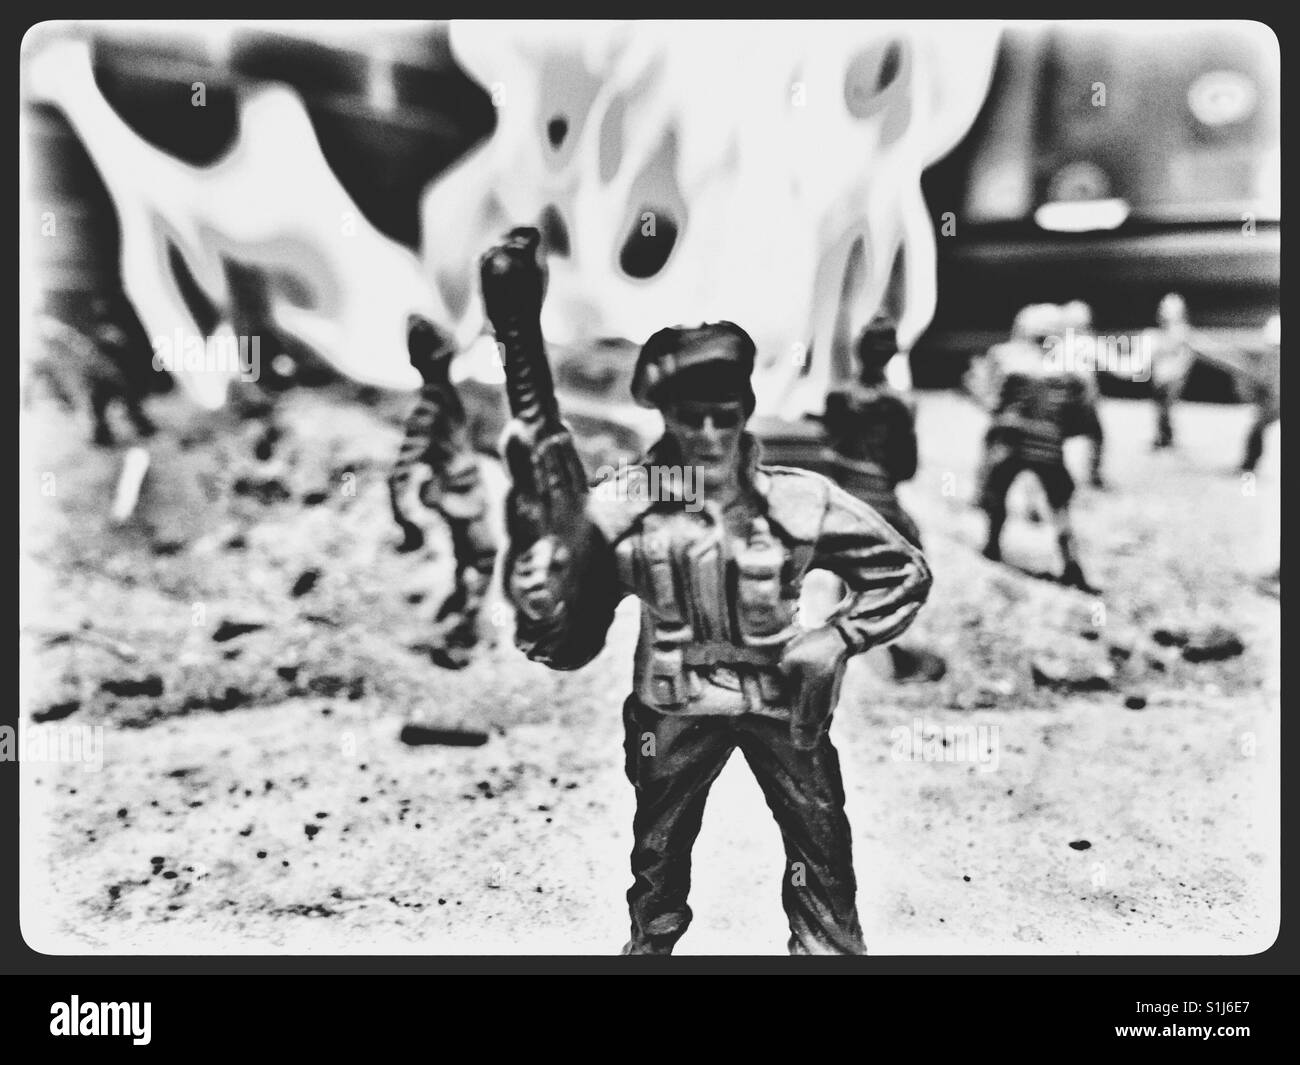 Toy Soldier Officer on the Battlefield. Stock Photo